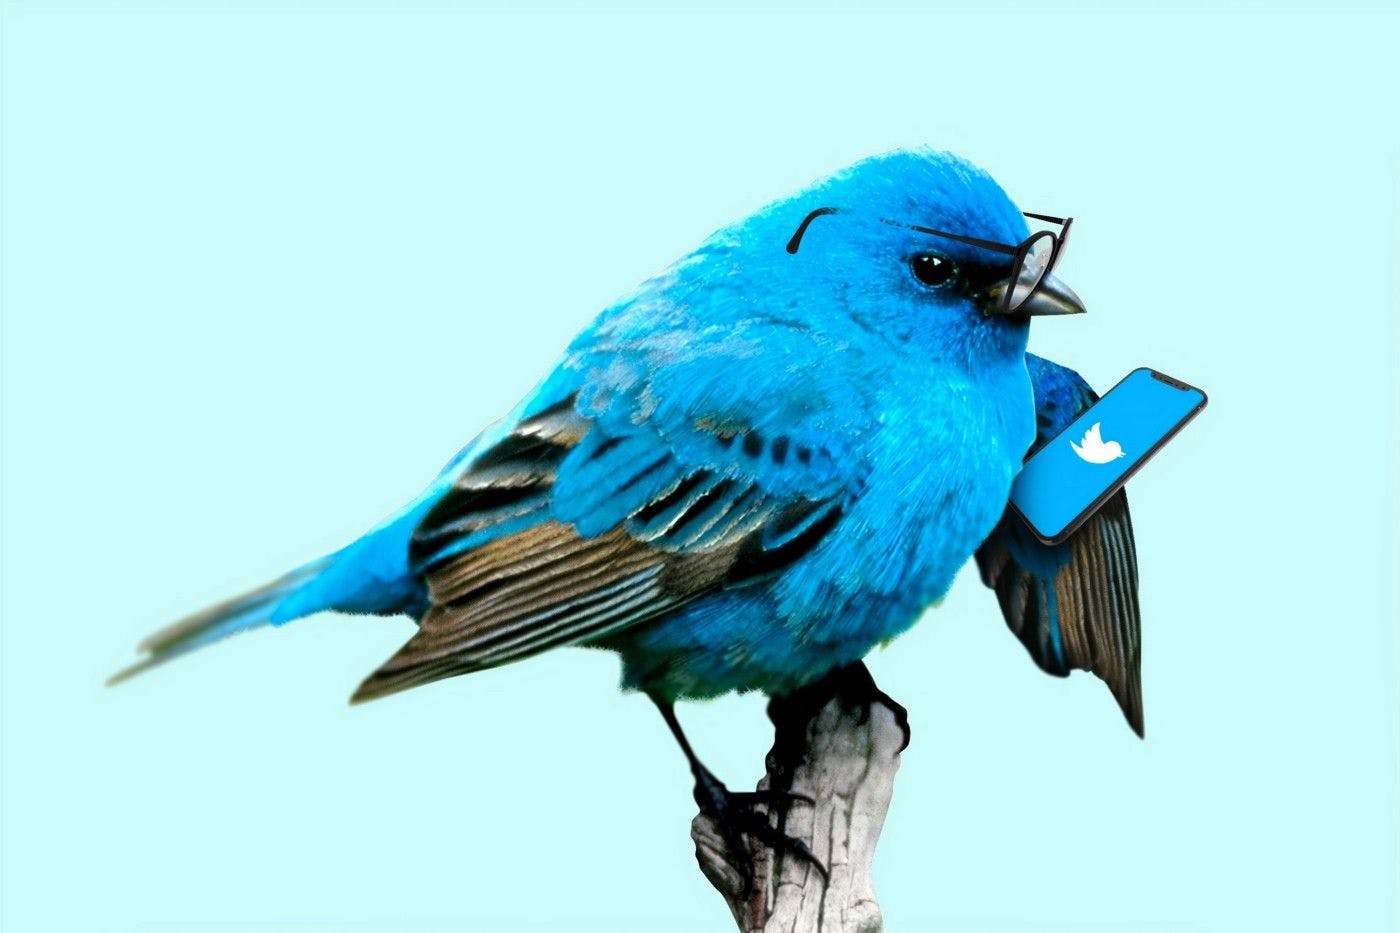 Blue bird reading mobile phone with Twitter logo